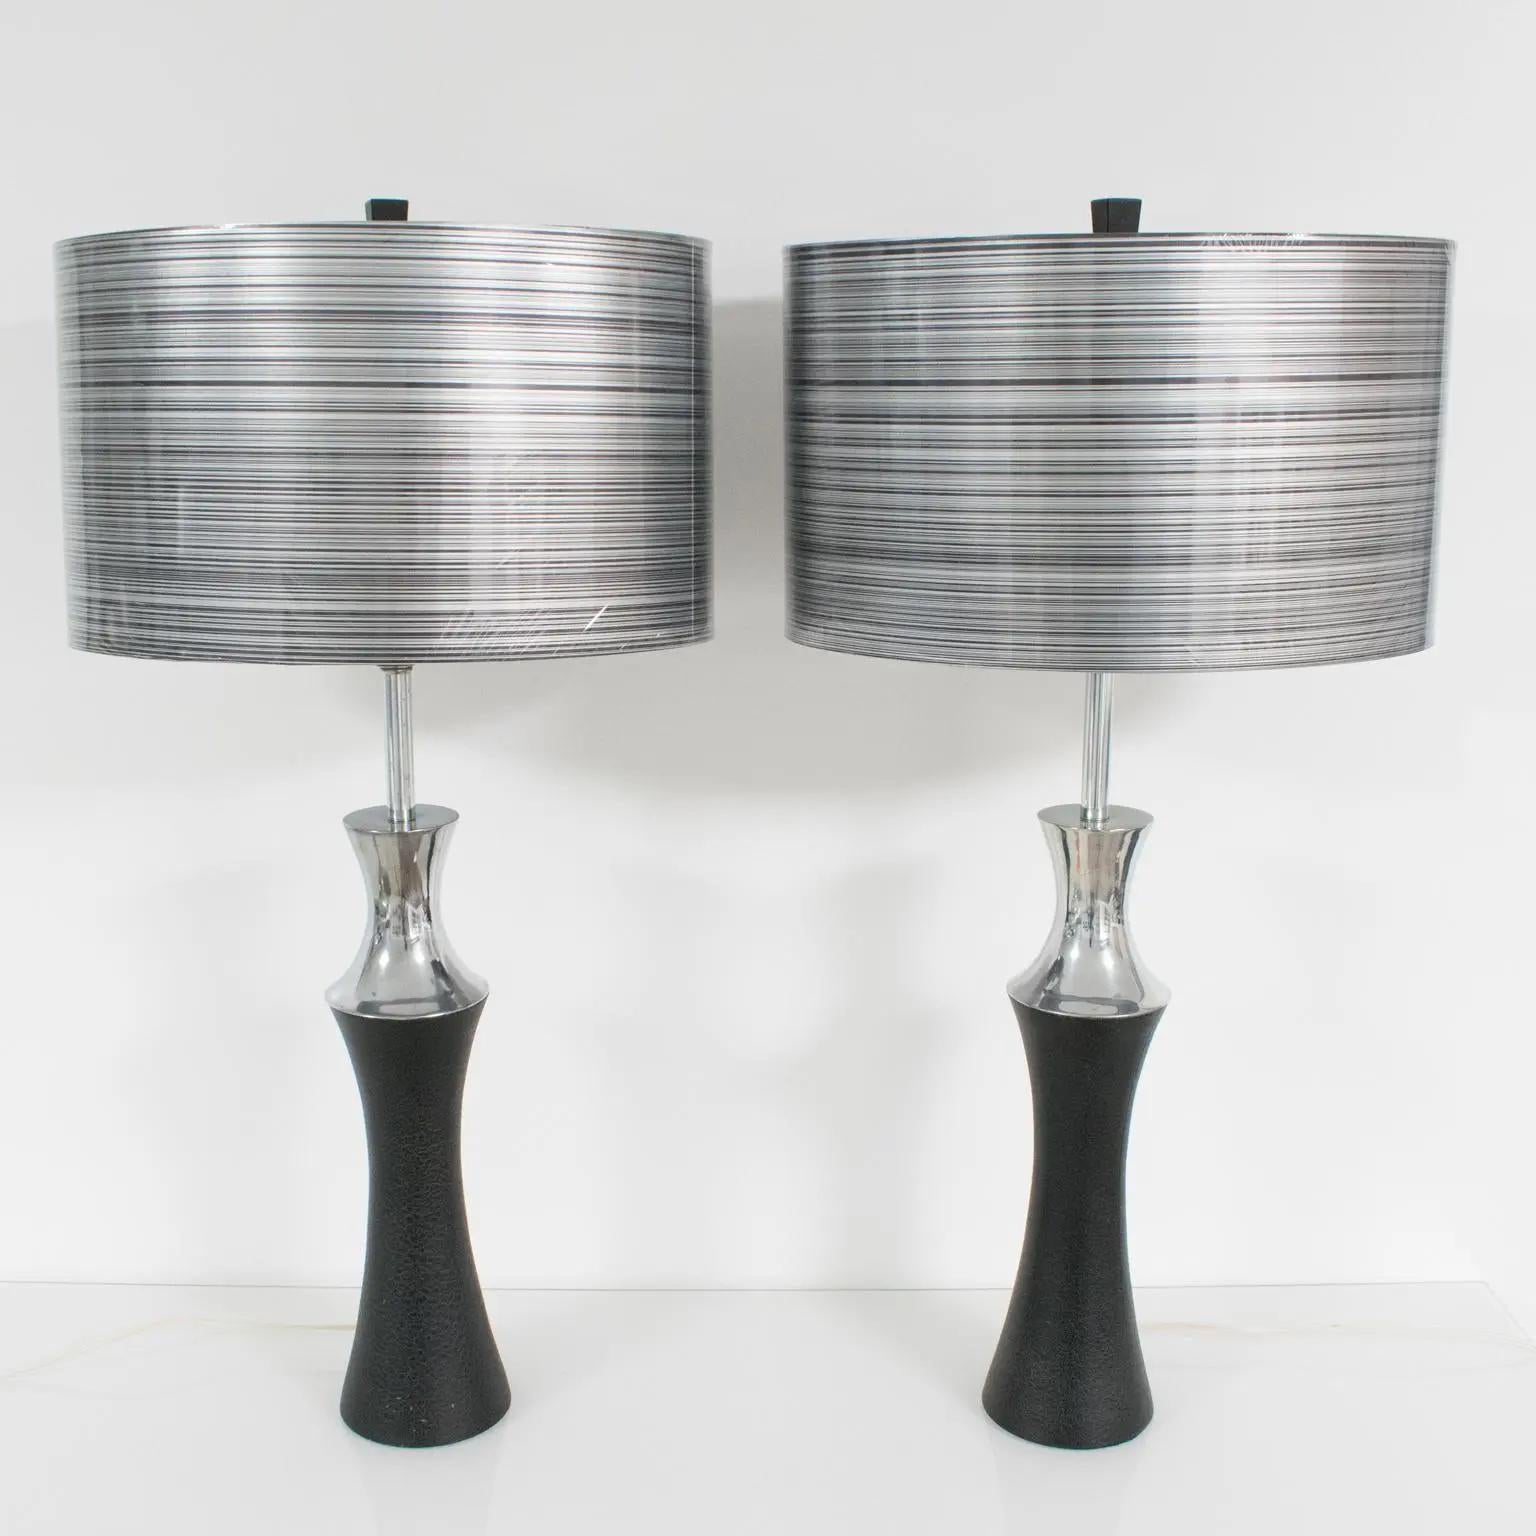 American Mutual Sunset Aluminum Table Lamp, a pair, 1960s For Sale